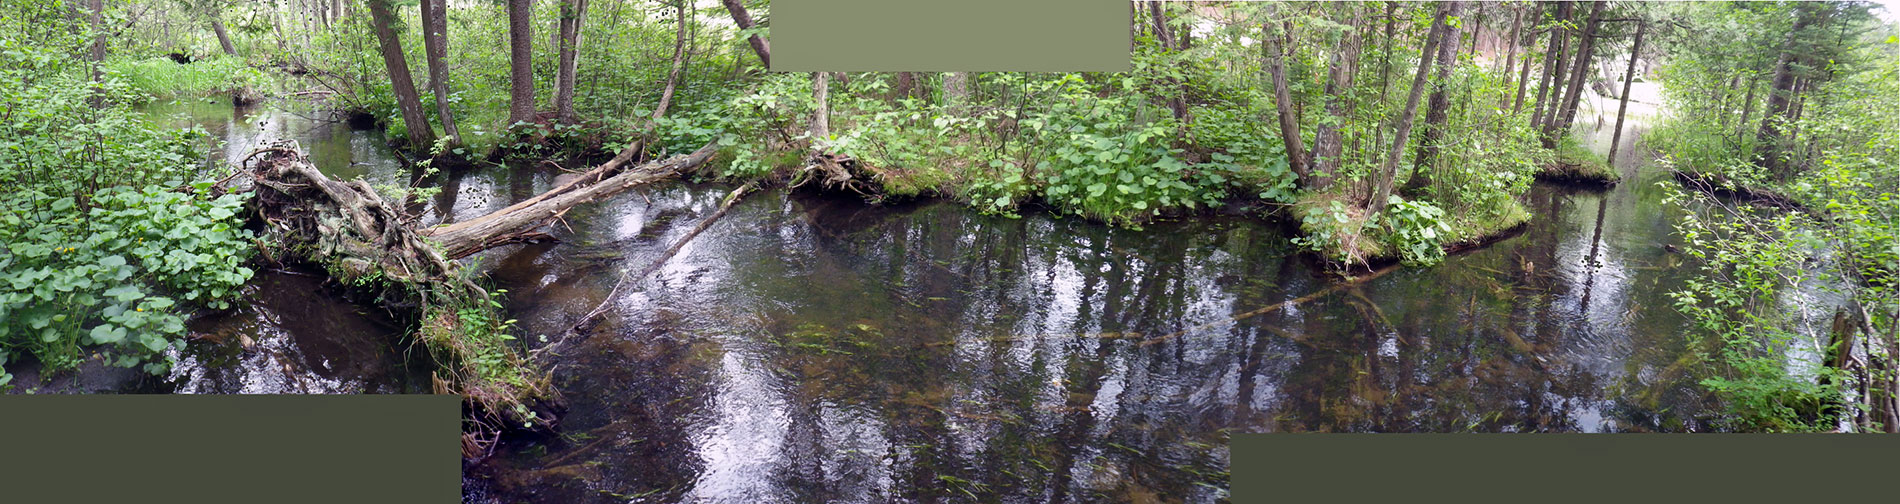 Creek pano, To see the full size image  click here.